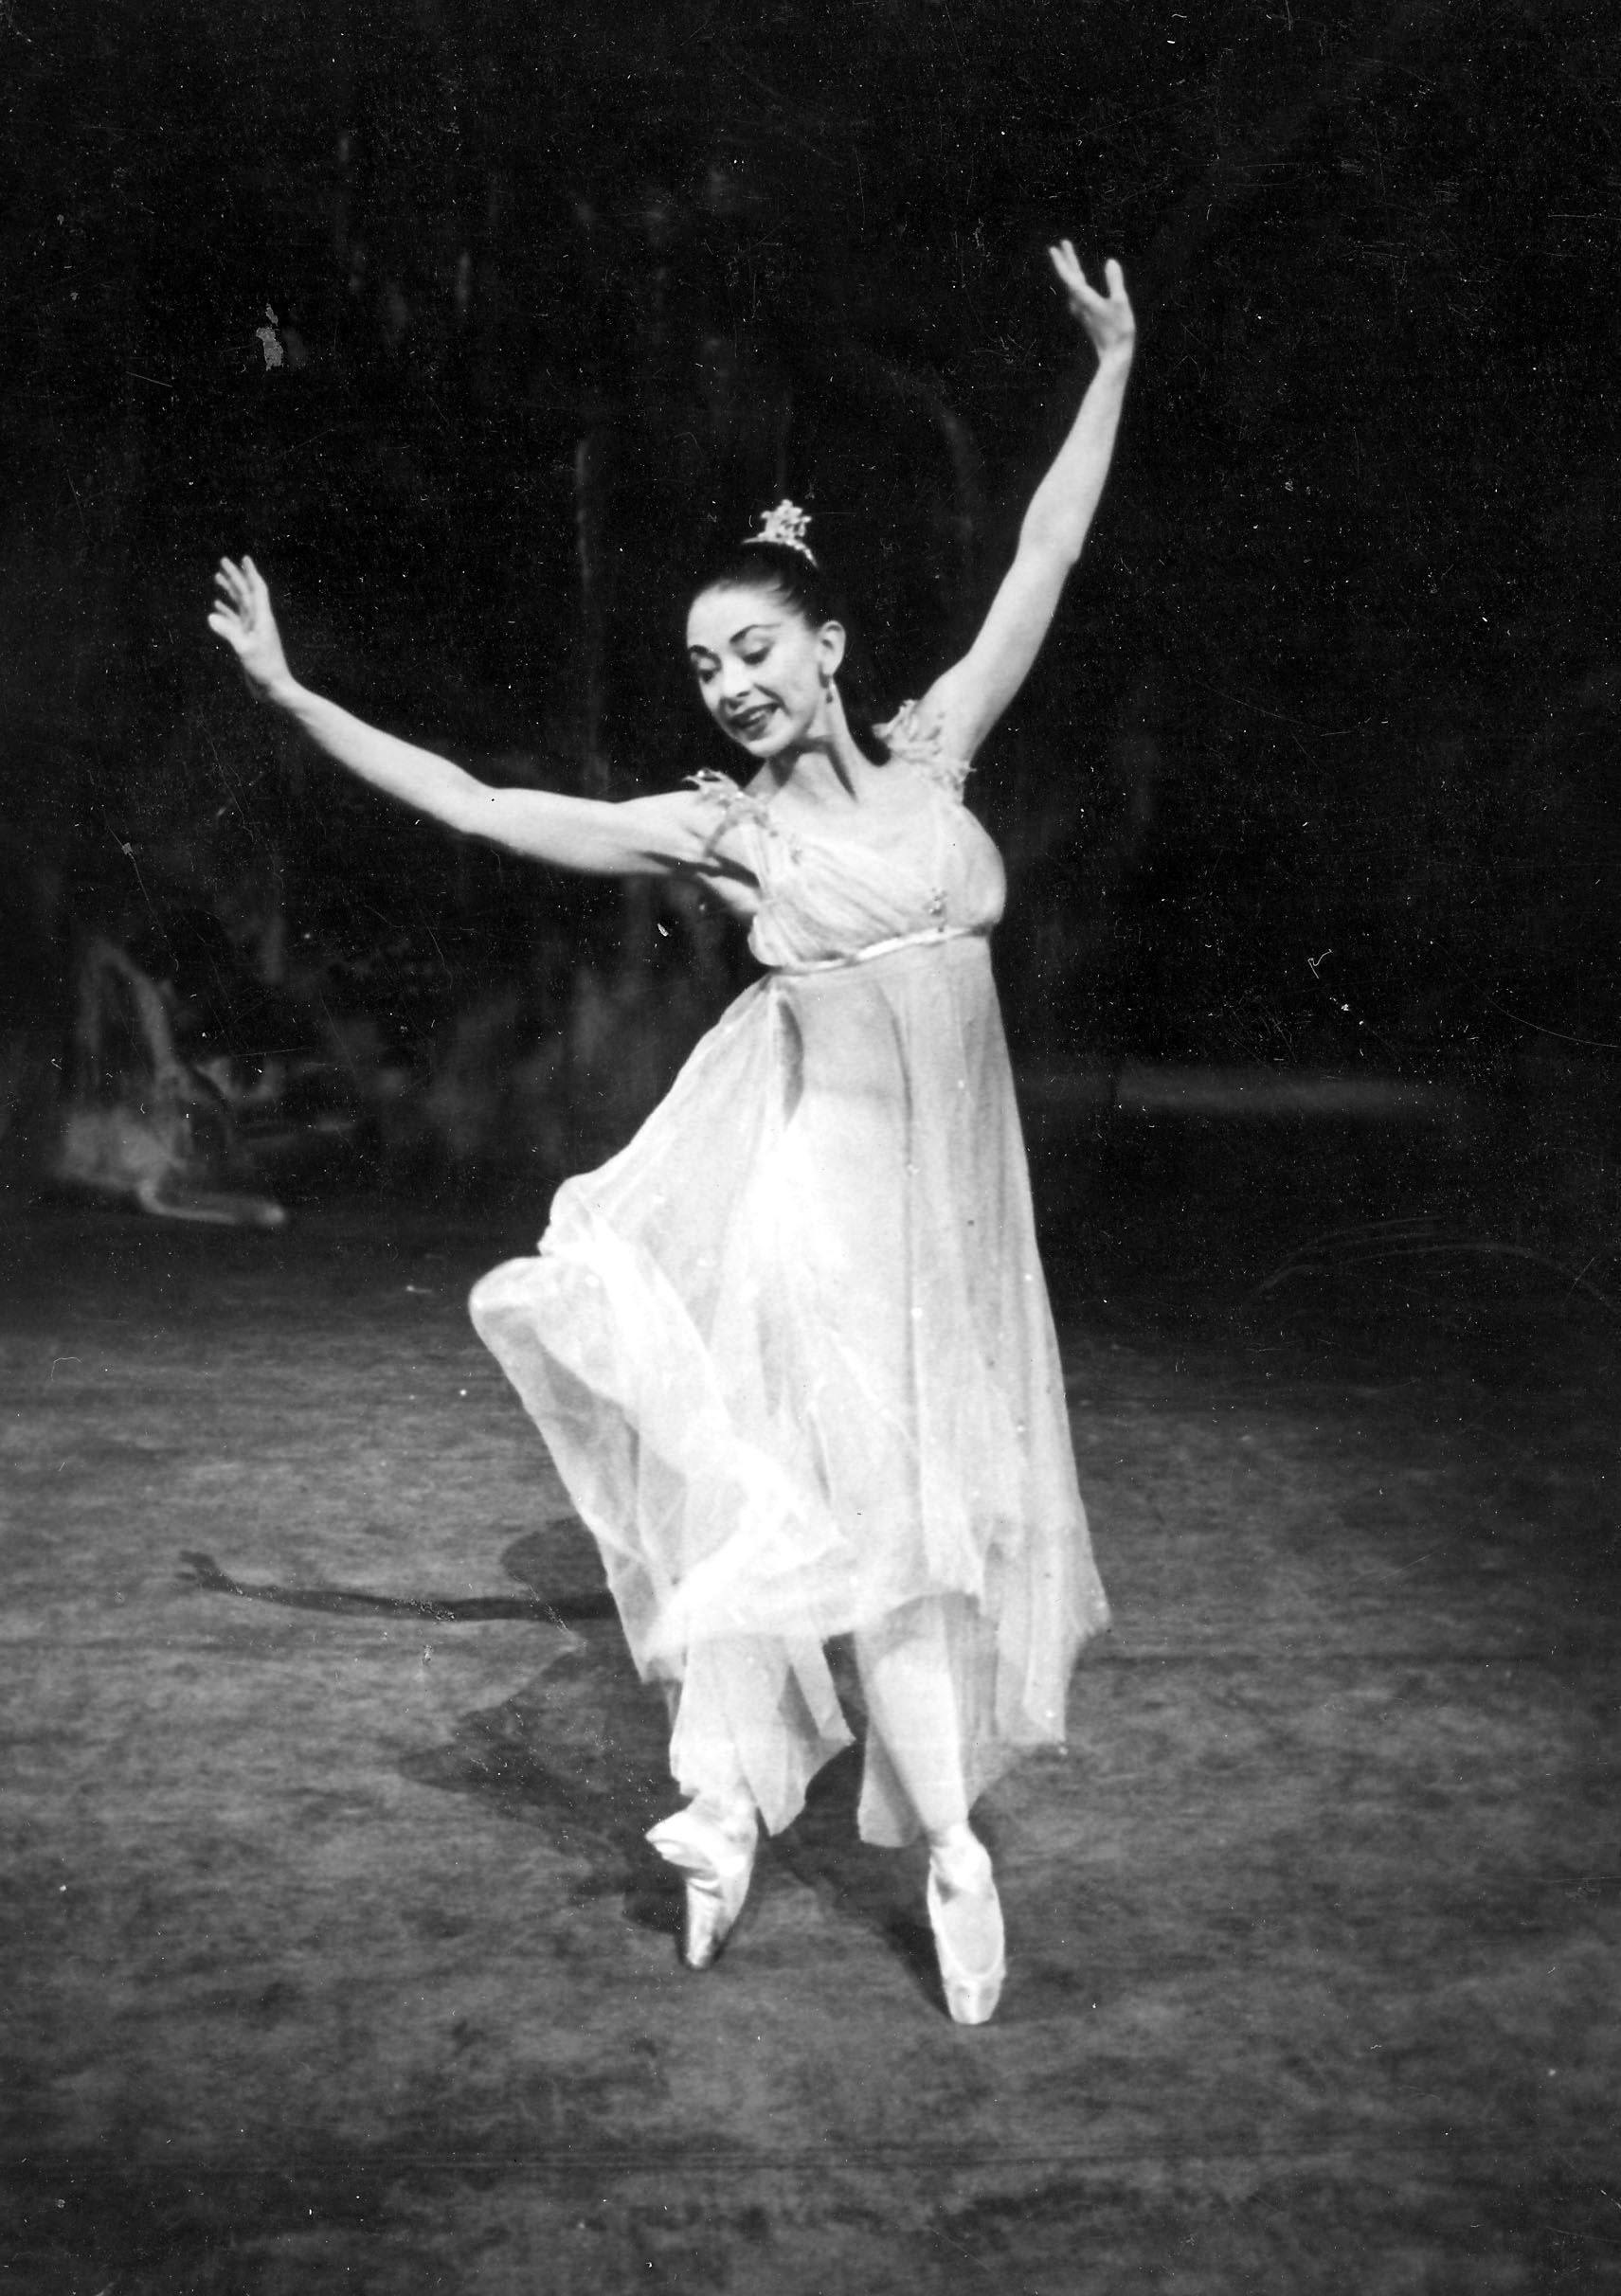 Margot Fonteyn in the world première of Frederick Ashton’s Ondine for the Royal Ballet in October 1958. Photo by GBL Wilson, © Royal Academy of Dance / ArenaPAL.